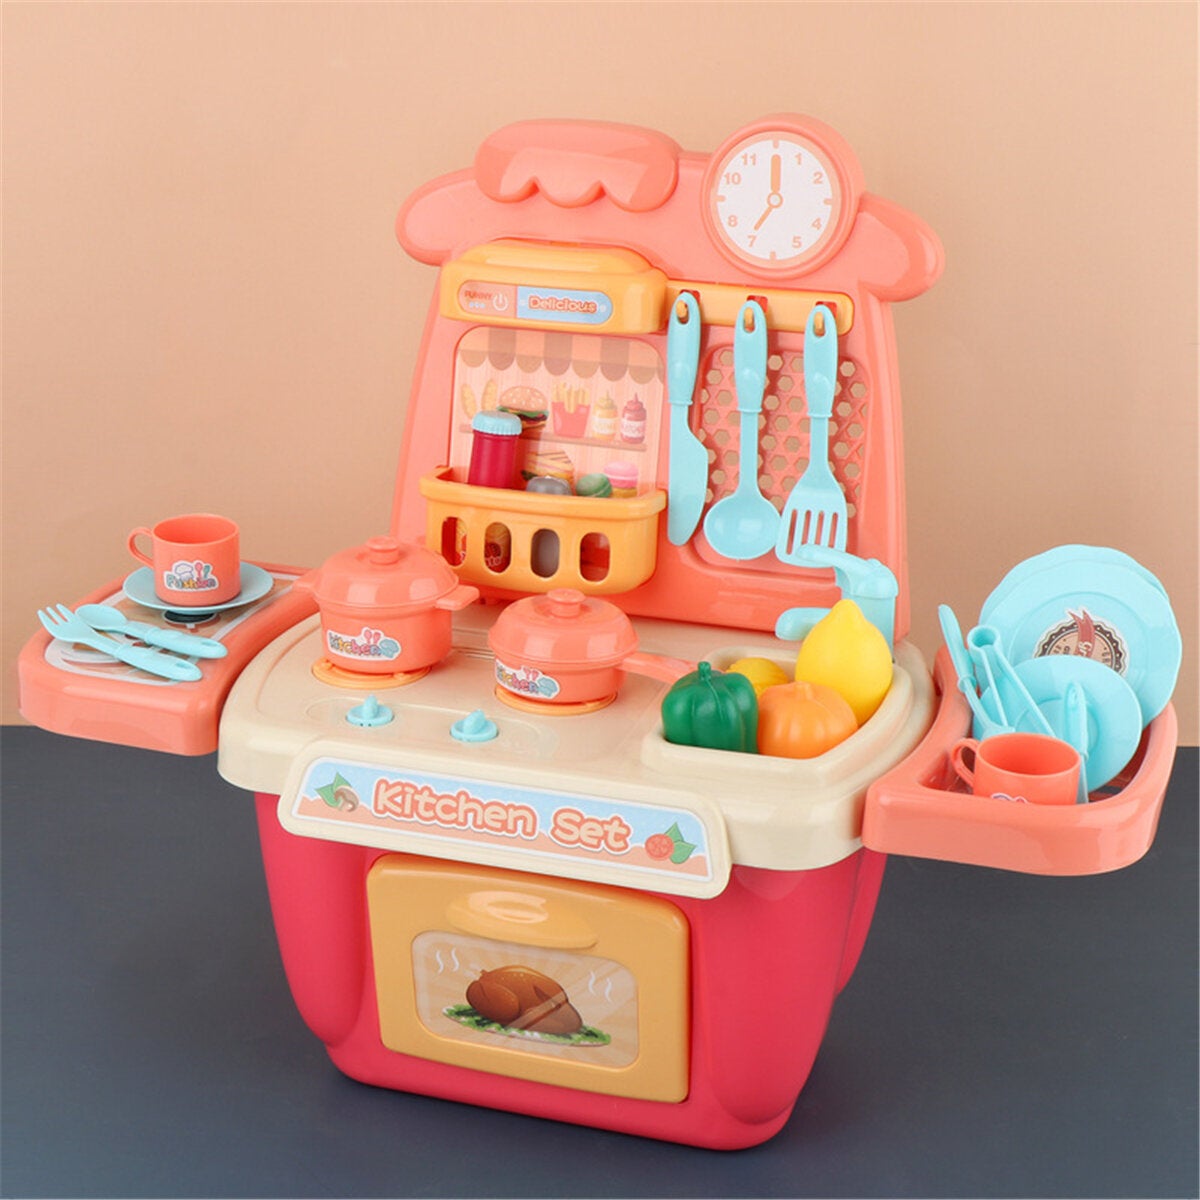 22/26 Pcs Simulation Mini Kitchen Cooking Play Fun Educational Toy Set with Realistic Lighting and Sound Effects for Kids Gift